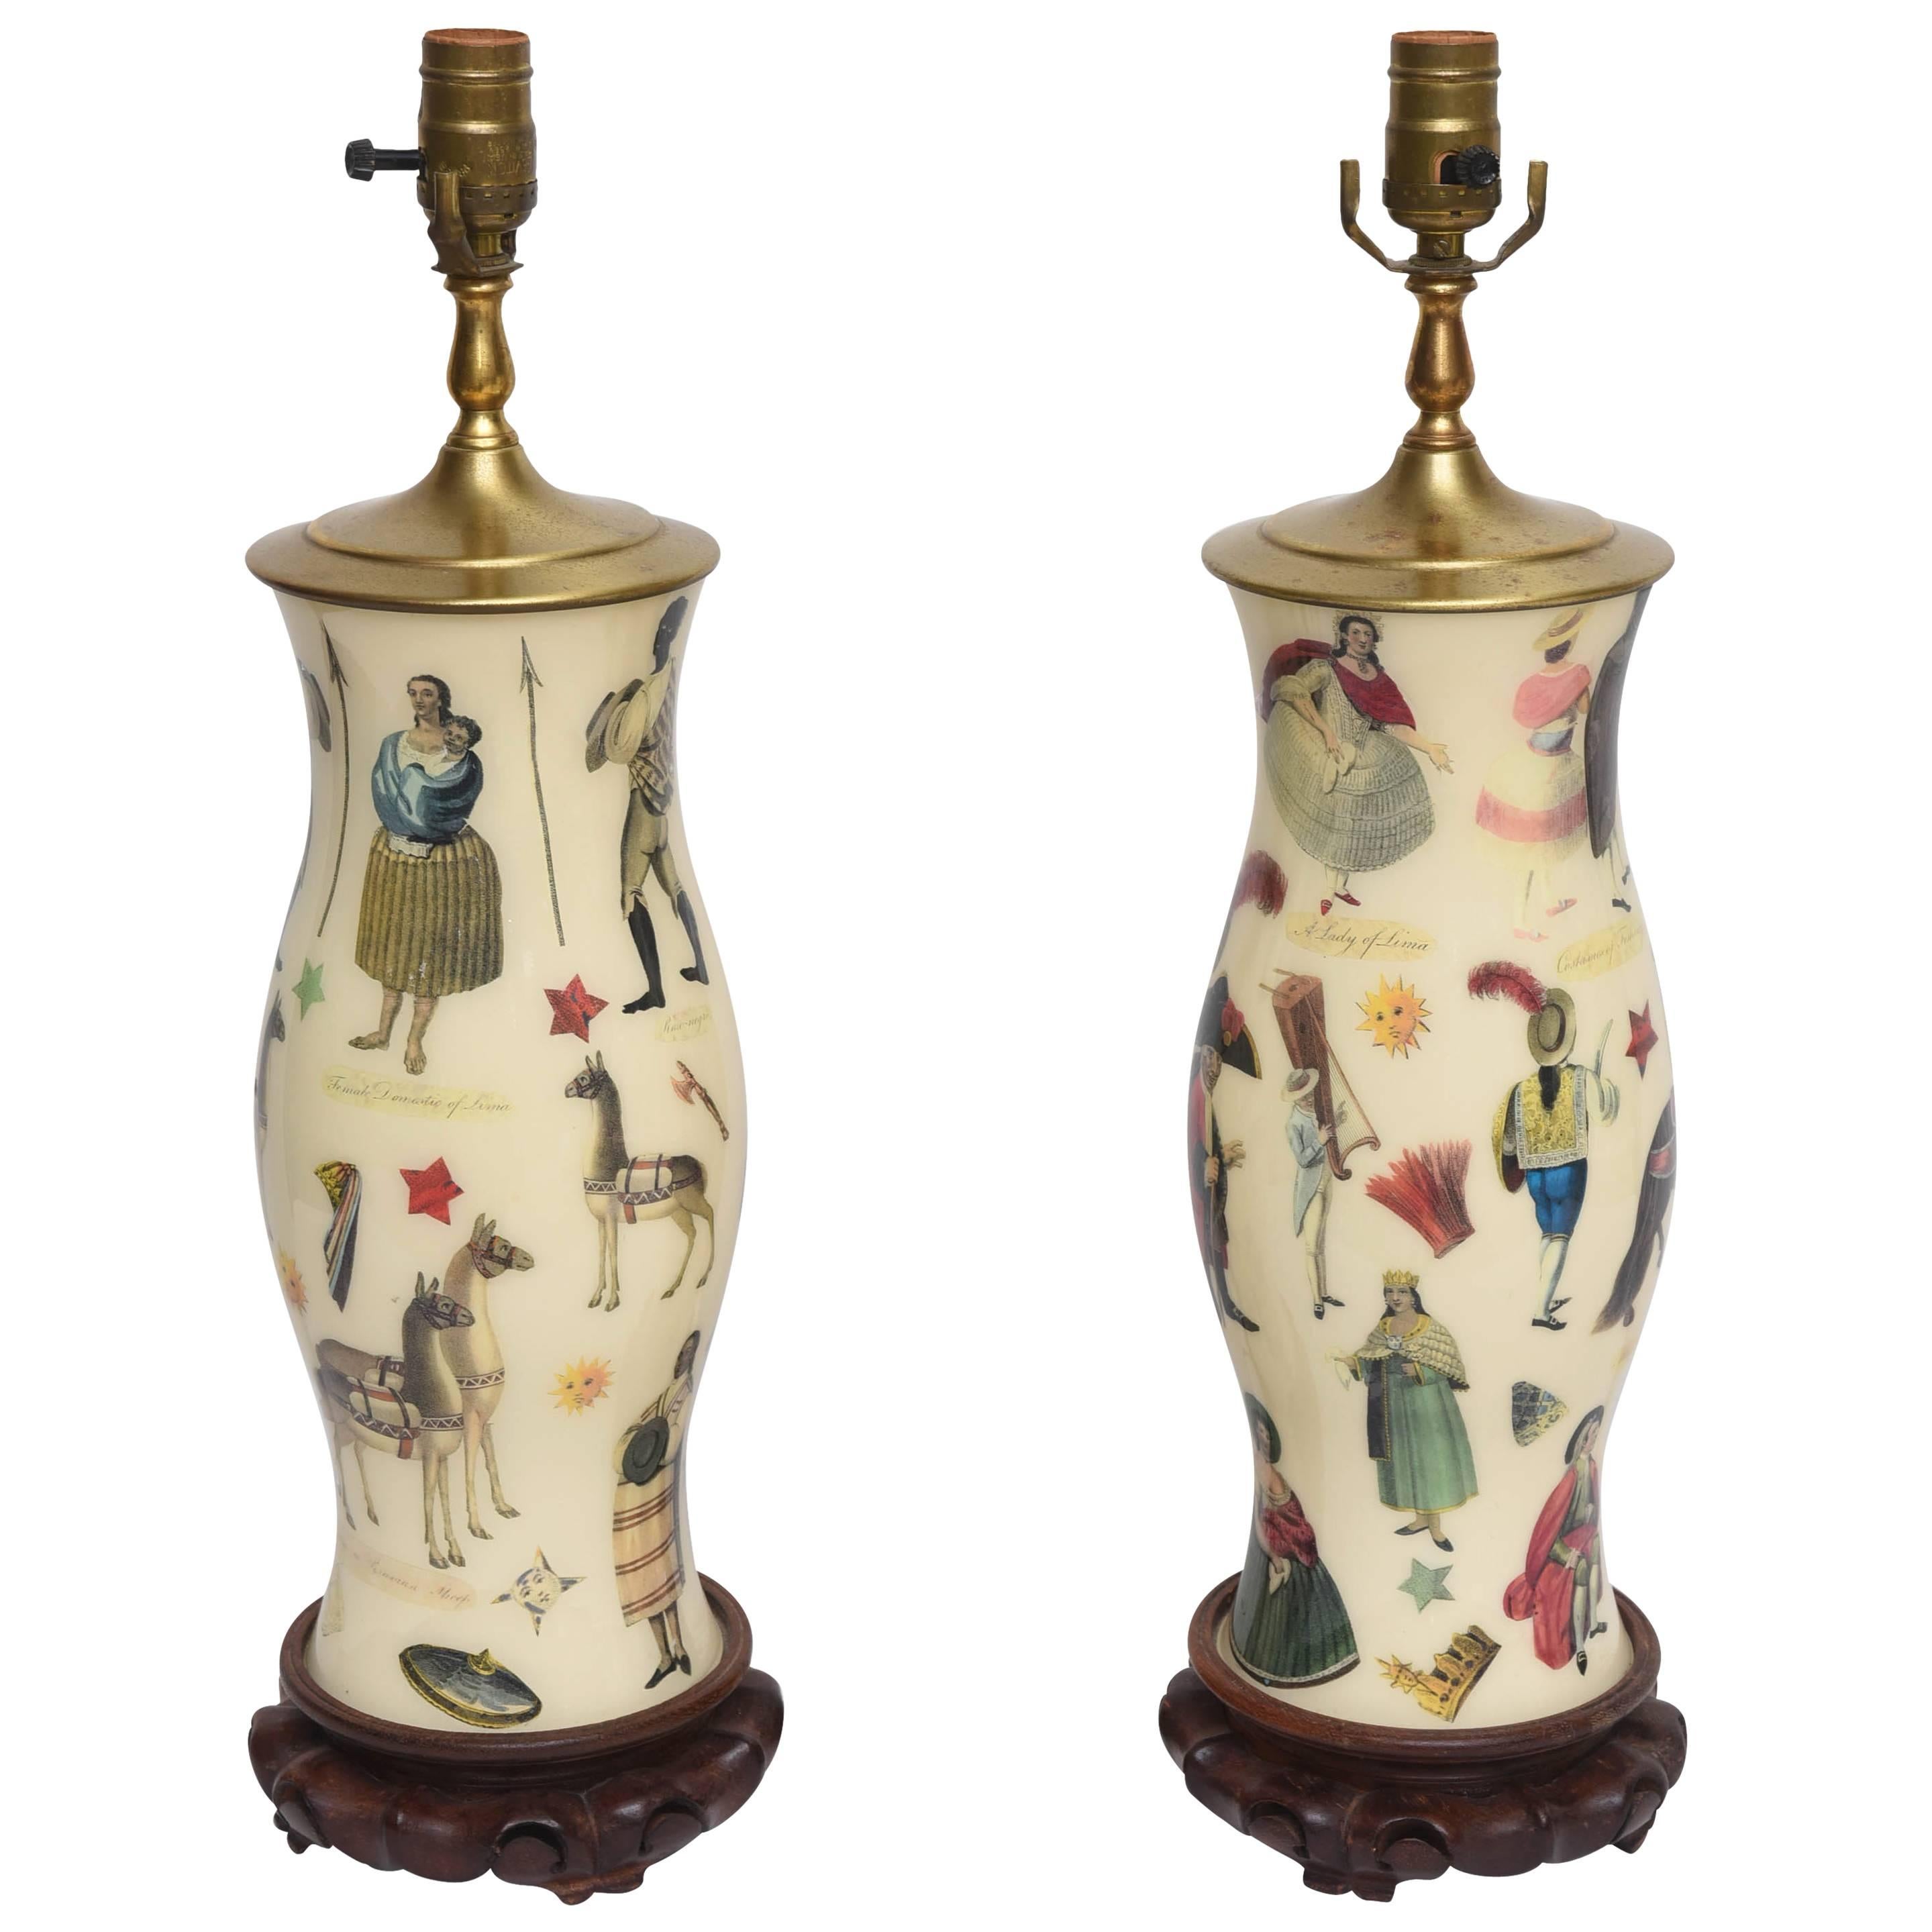 Pair of Vintage Decoupage Lamps with Spanish Colonial Theme